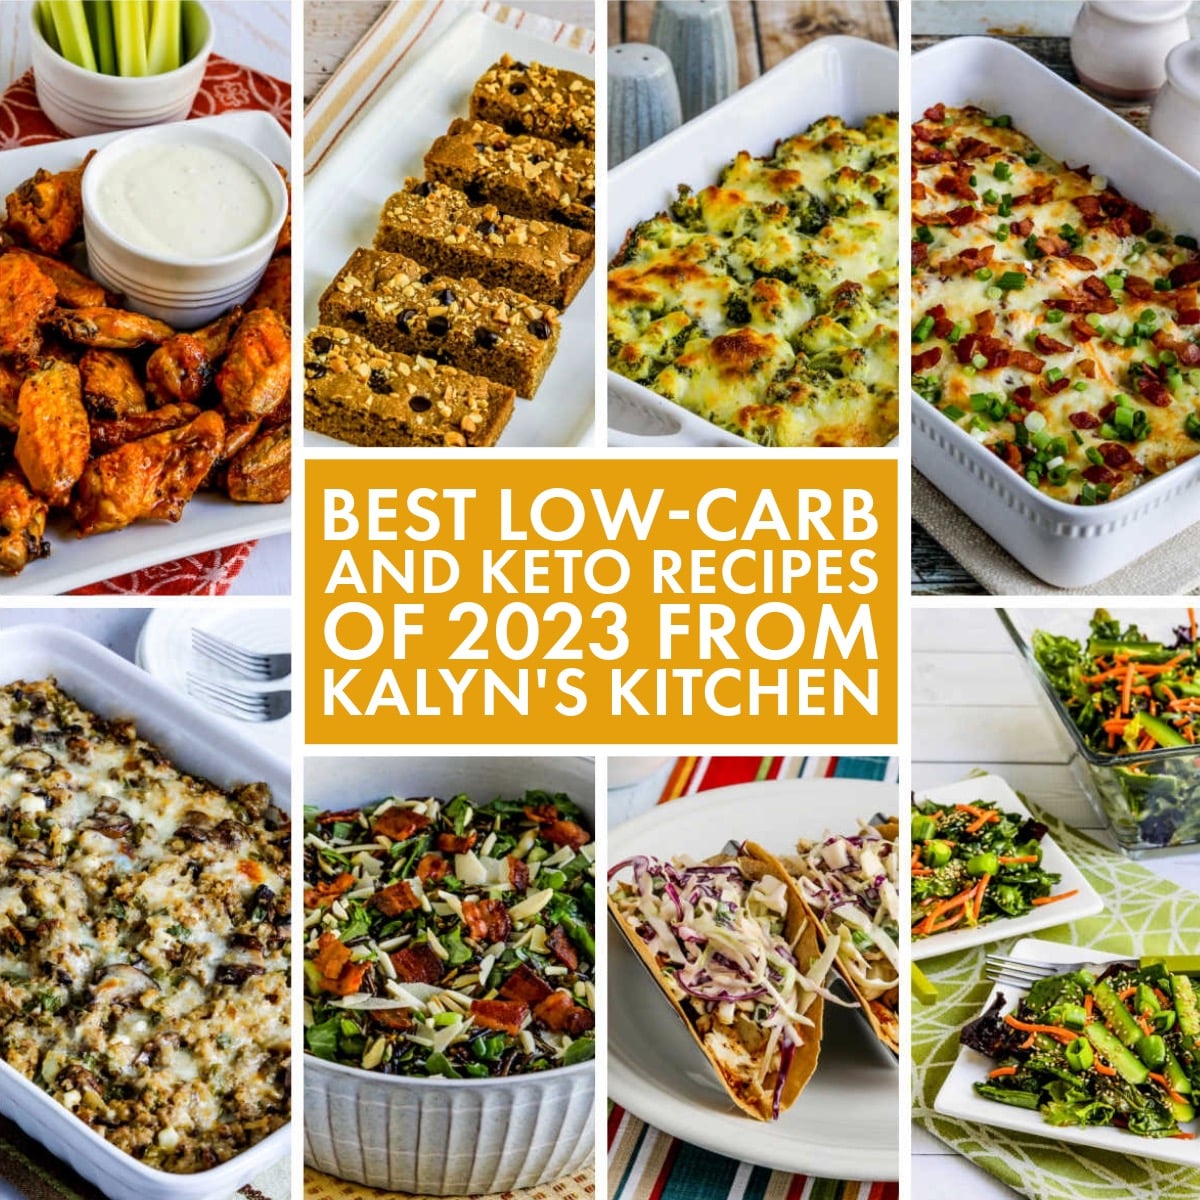 Best Low-Carb and Keto Recipes of 2023 from Kalyn's Kitchen text overlay collage.